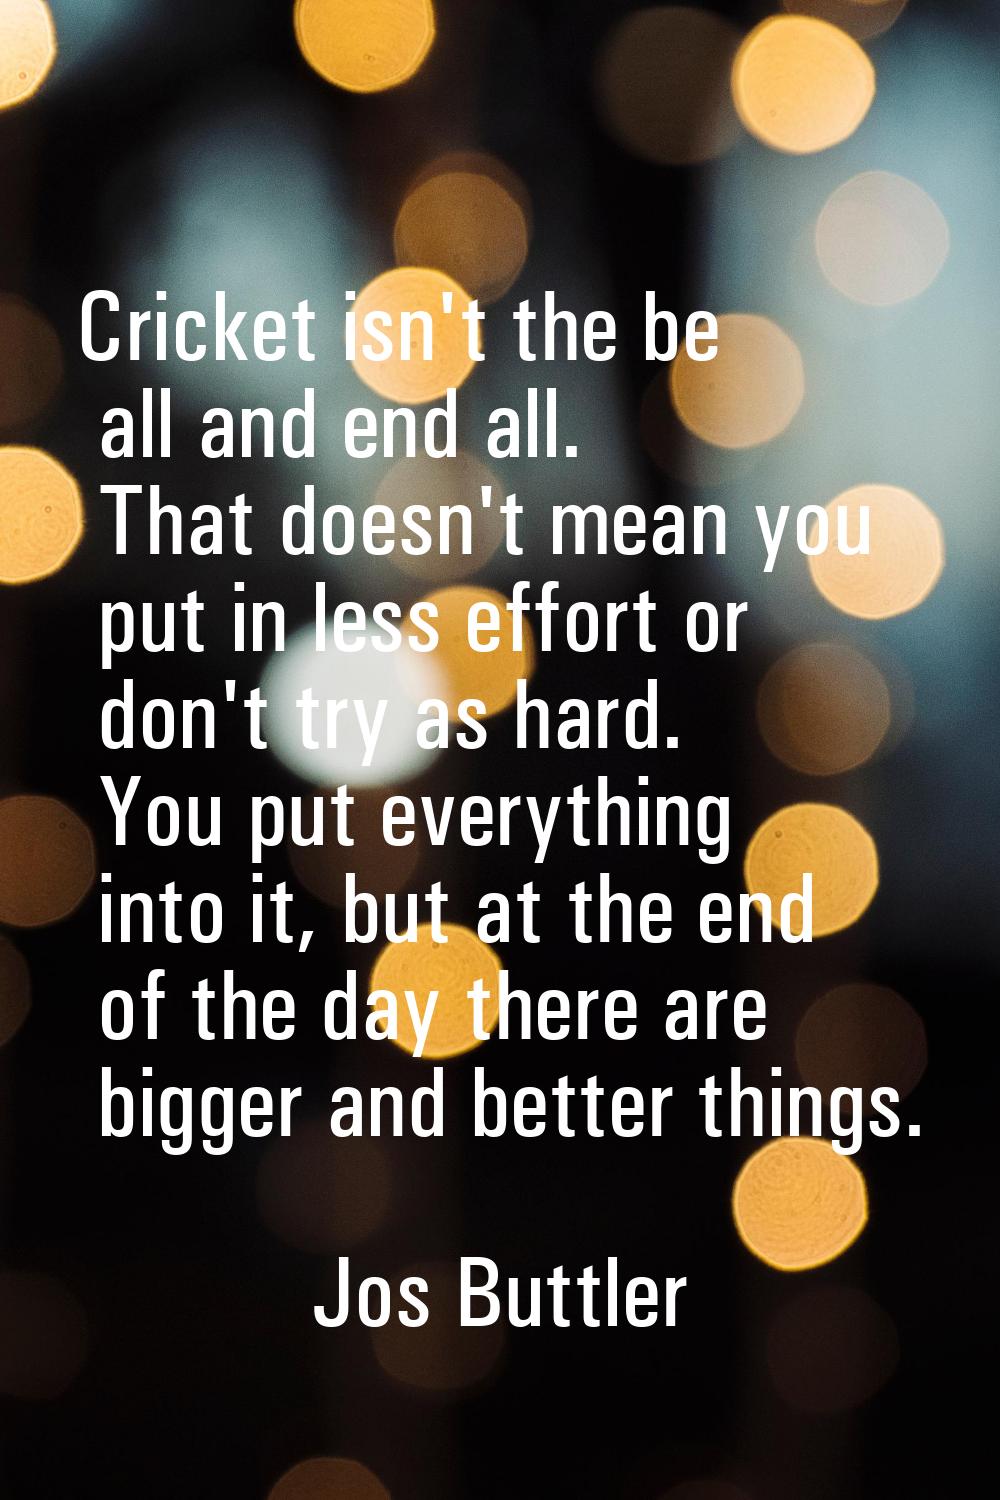 Cricket isn't the be all and end all. That doesn't mean you put in less effort or don't try as hard